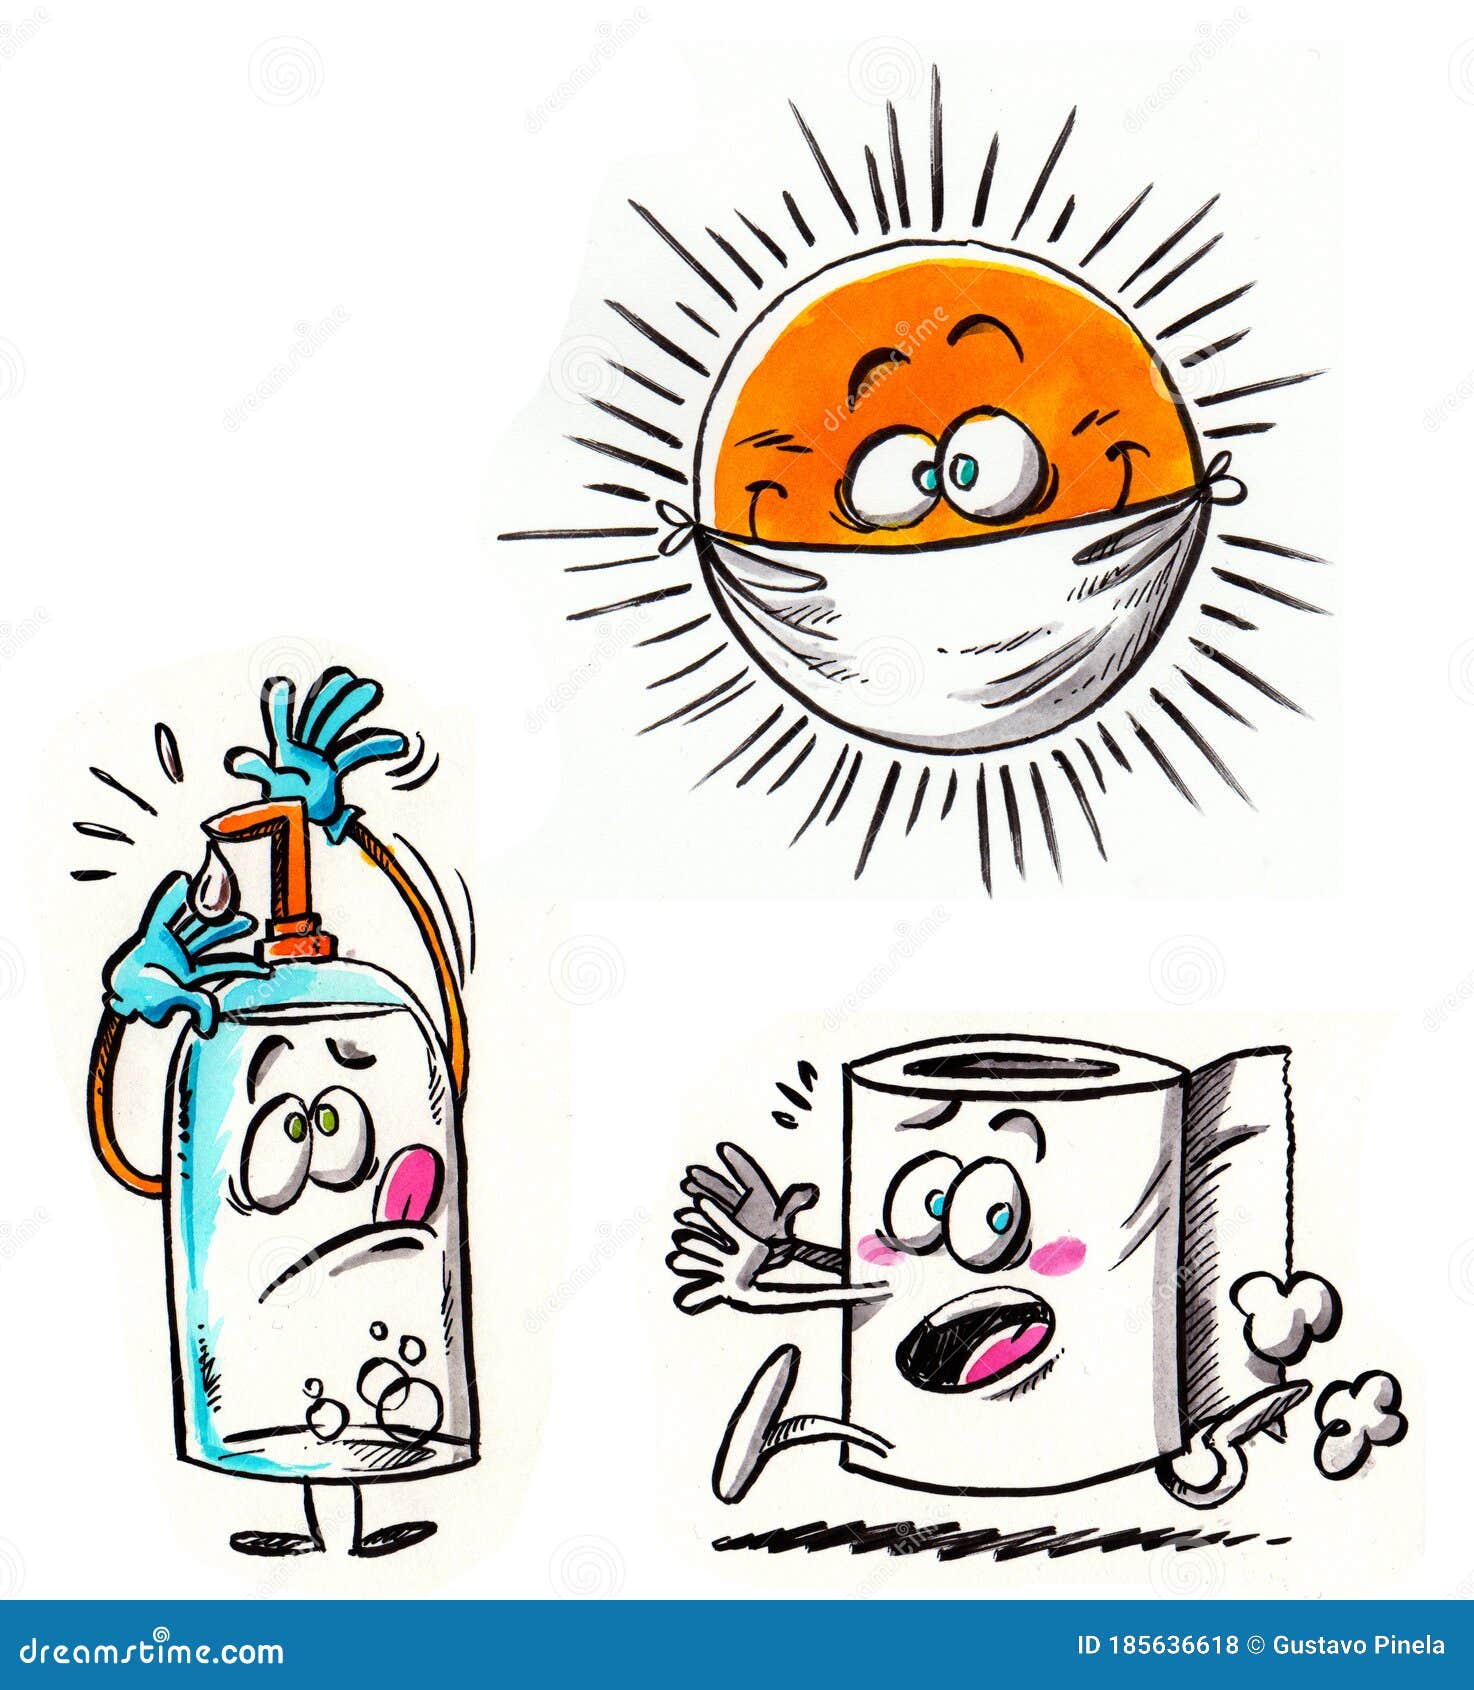 pandemic resources covid-19 virus disease; sun with mask, a roll of toilet, and a bottle of hydroalcoholic gel